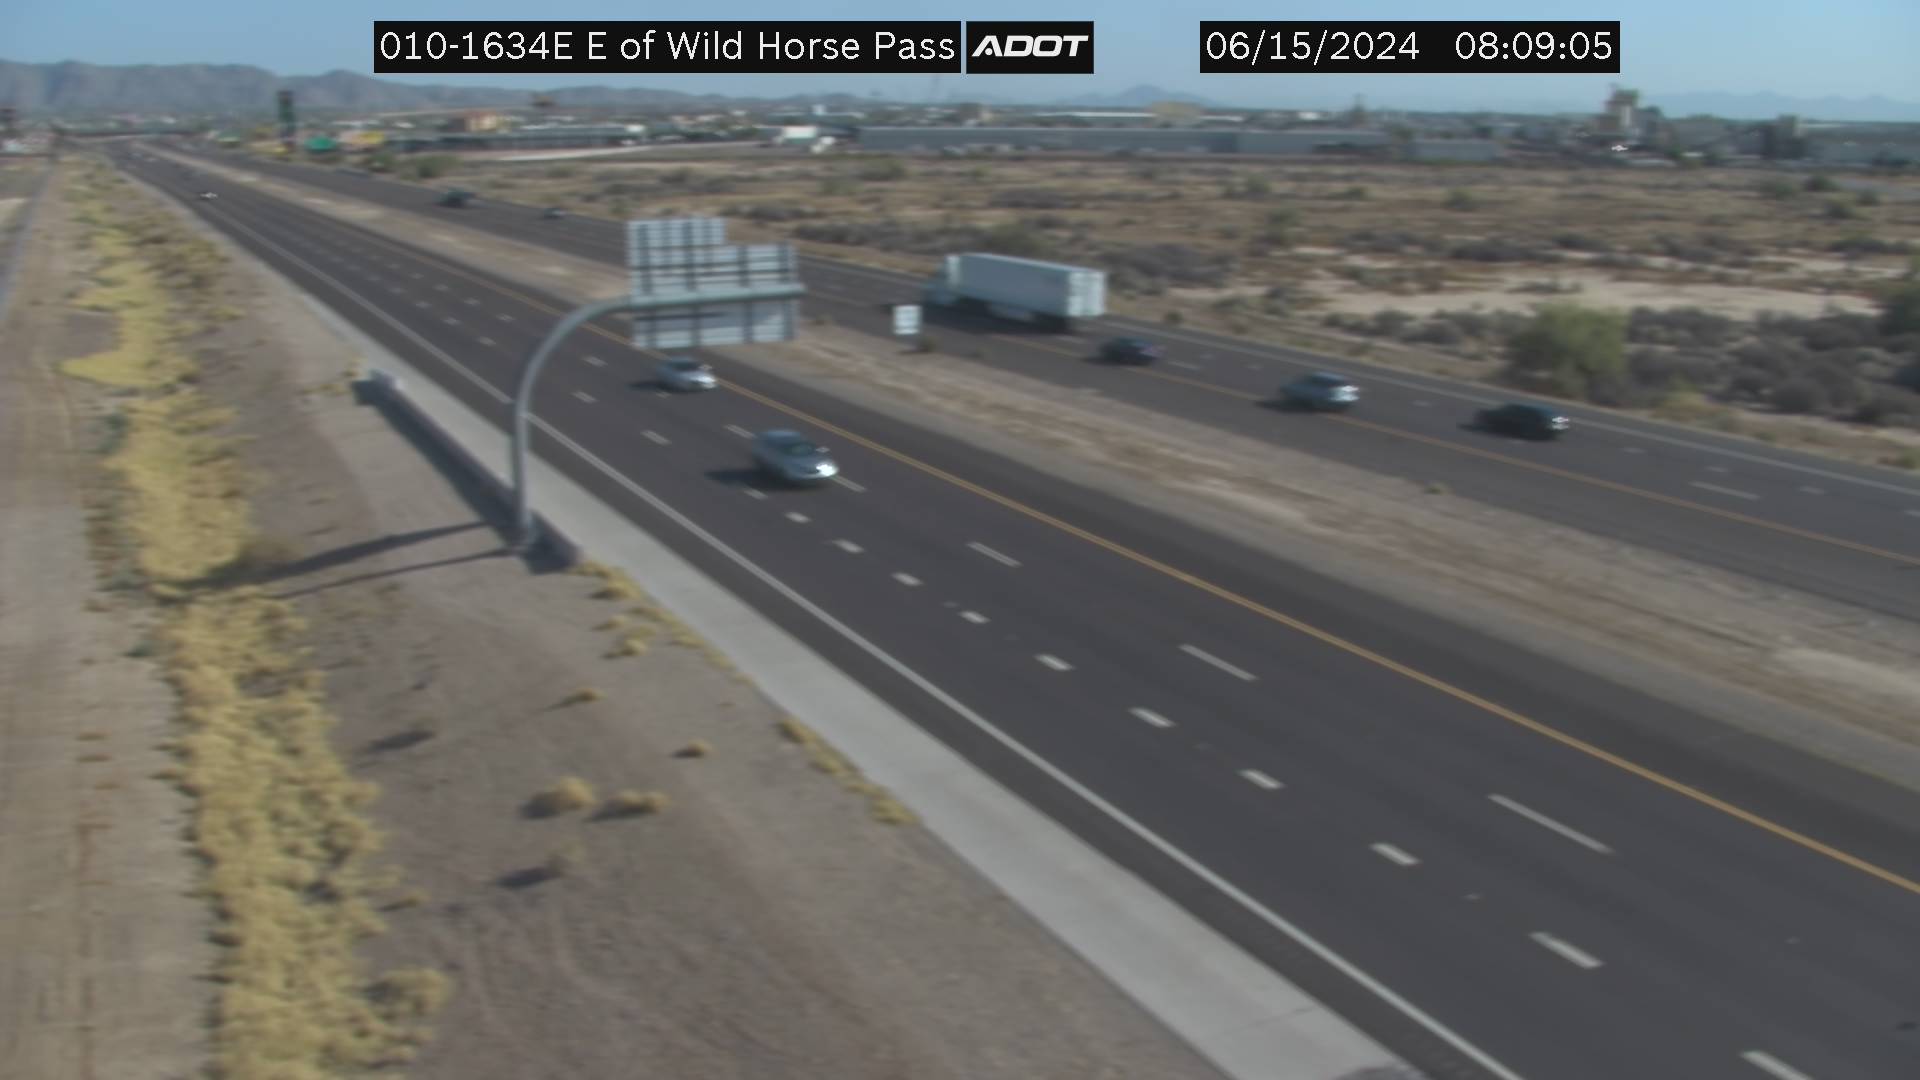 I-10 EB 163.44 @W of Queen Creek -  Eastbound Traffic Camera